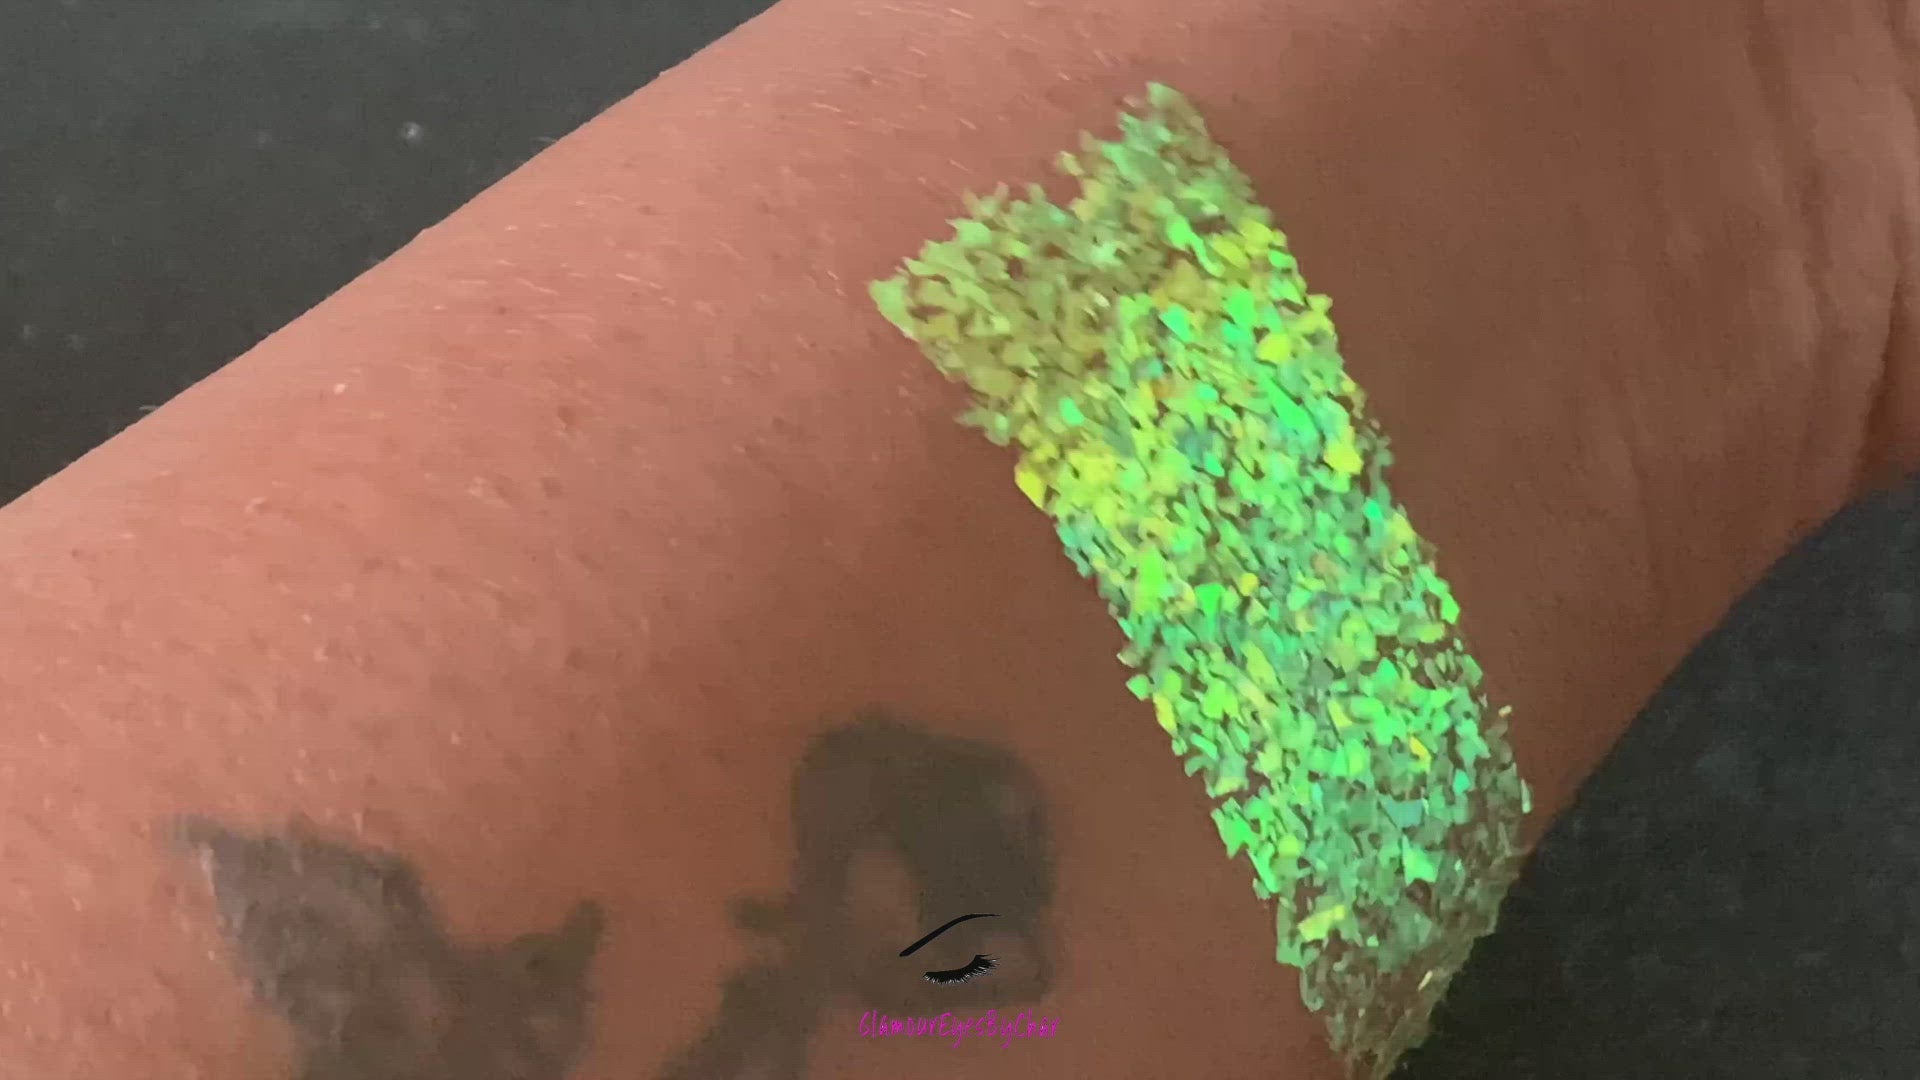 This glitter is called Greentini and is part of the cellophane glitter flakes collection. It consists of bright green iridescent glitter with golden reflects. Greentini is perfect for body and nail art, glitter slime, resin art or DIY projects. Comes in 5g jars only.